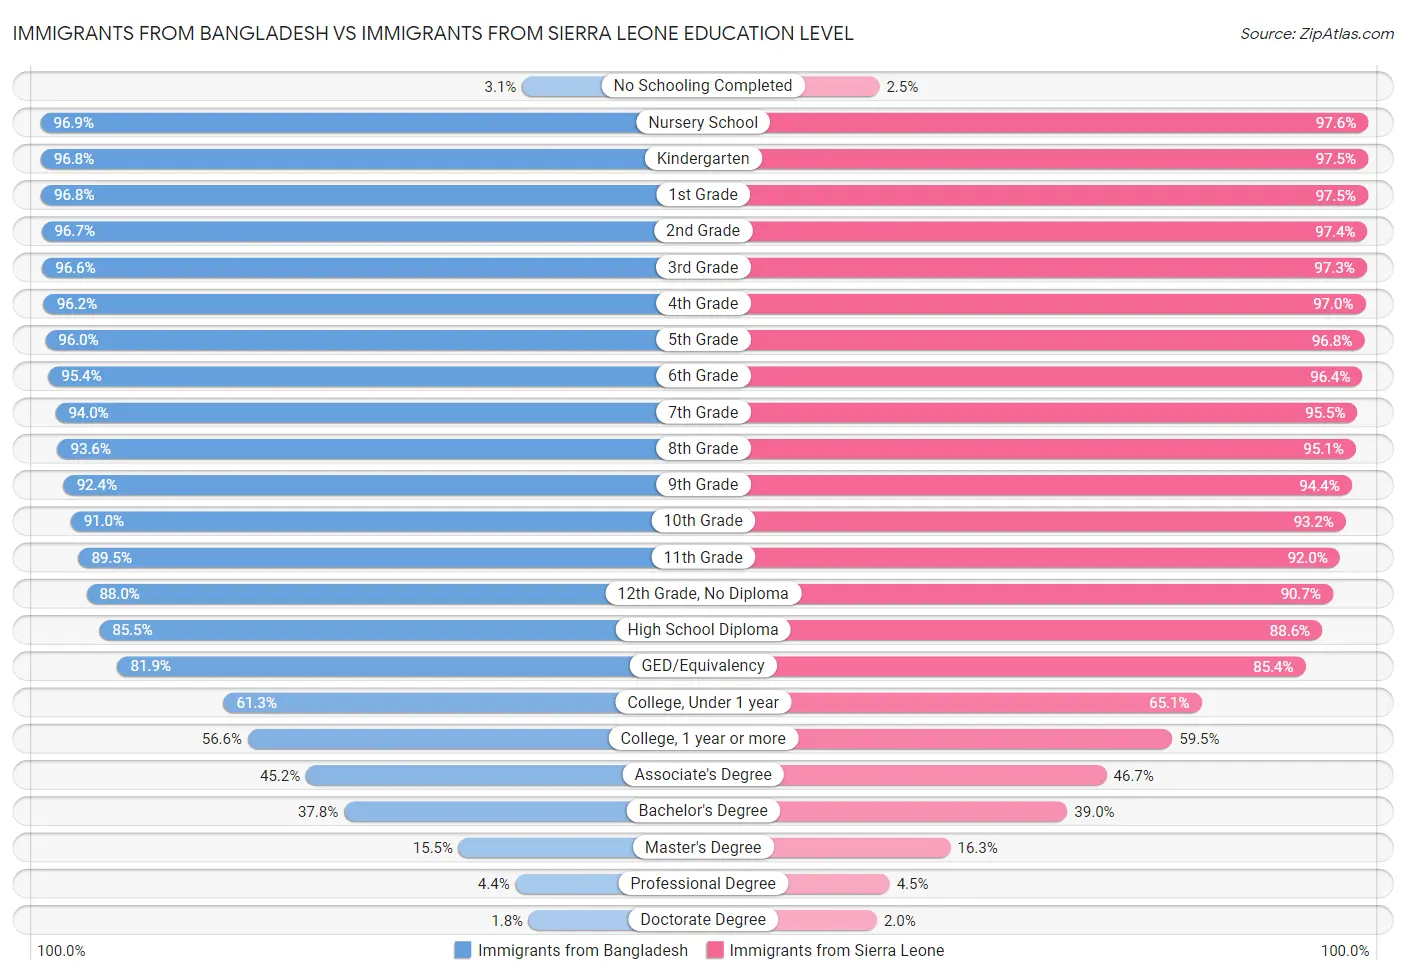 Immigrants from Bangladesh vs Immigrants from Sierra Leone Education Level